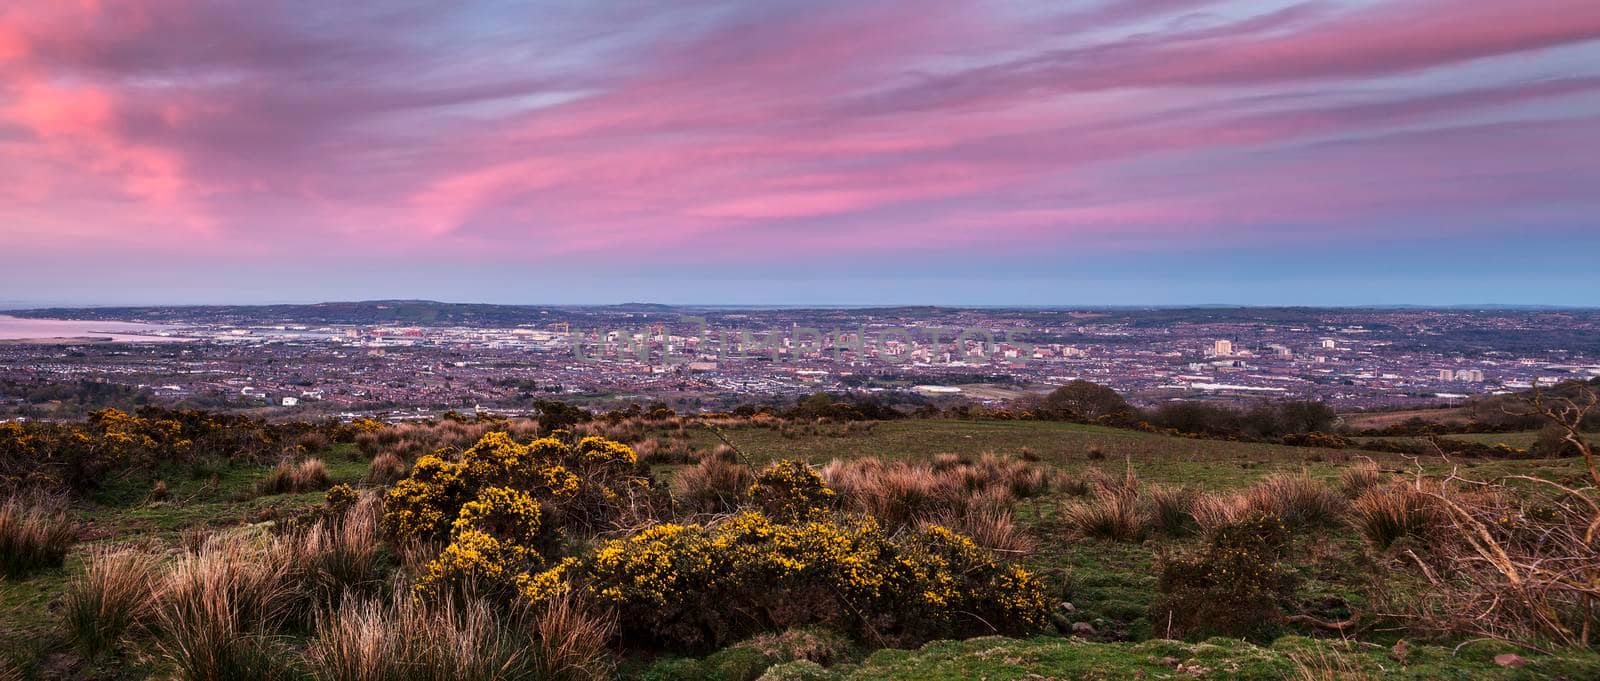 Panorama of Belfast at sunset by benkrut